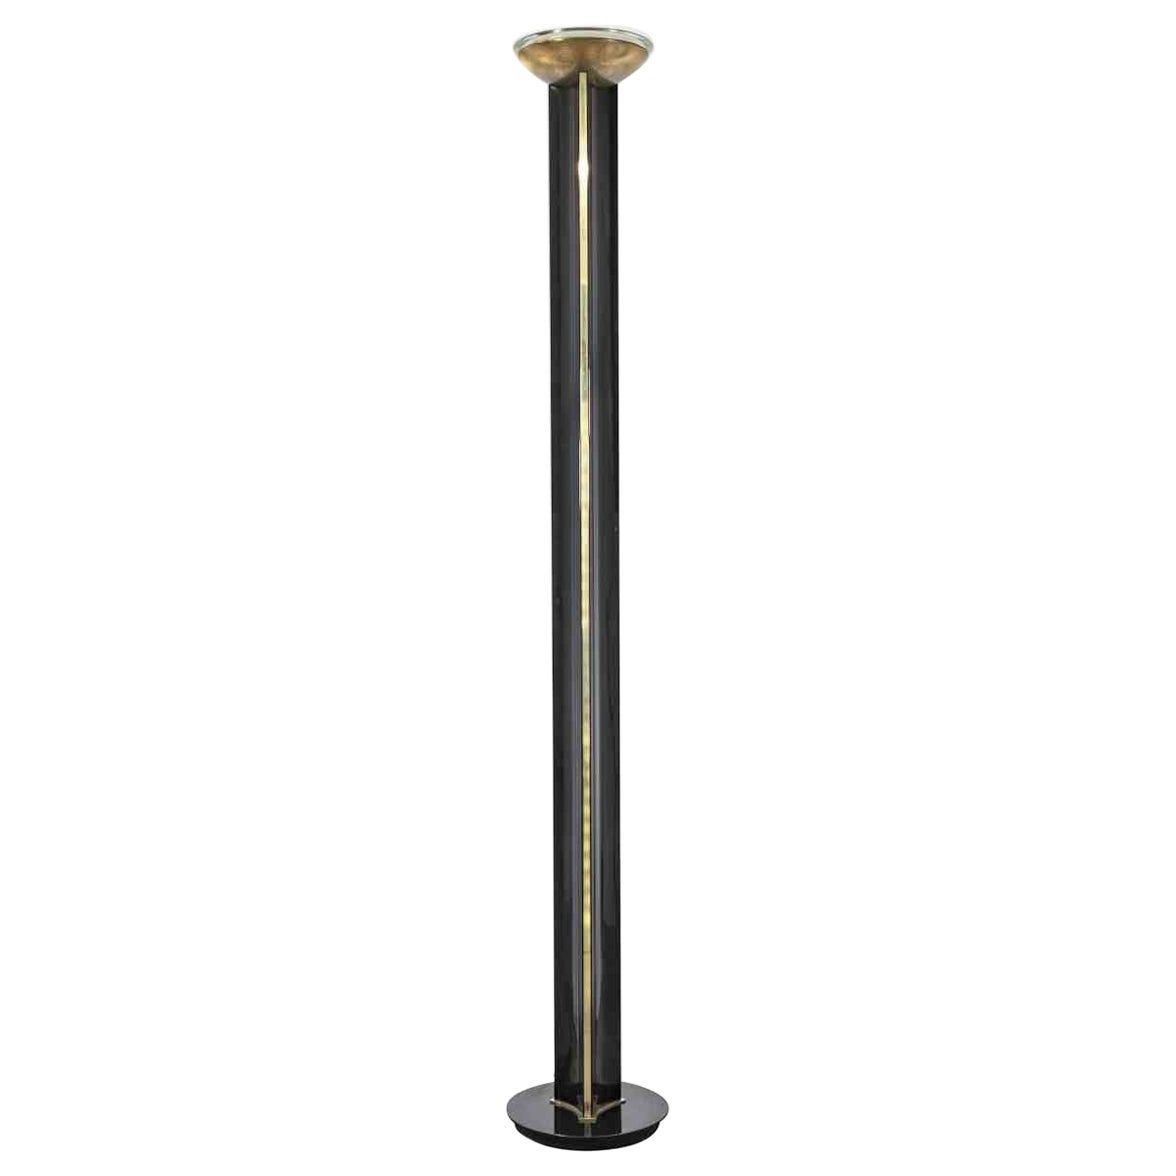 Vintage Floor Lamp by Gianfranco Frattini for Relco Italia, Italy, 1980s